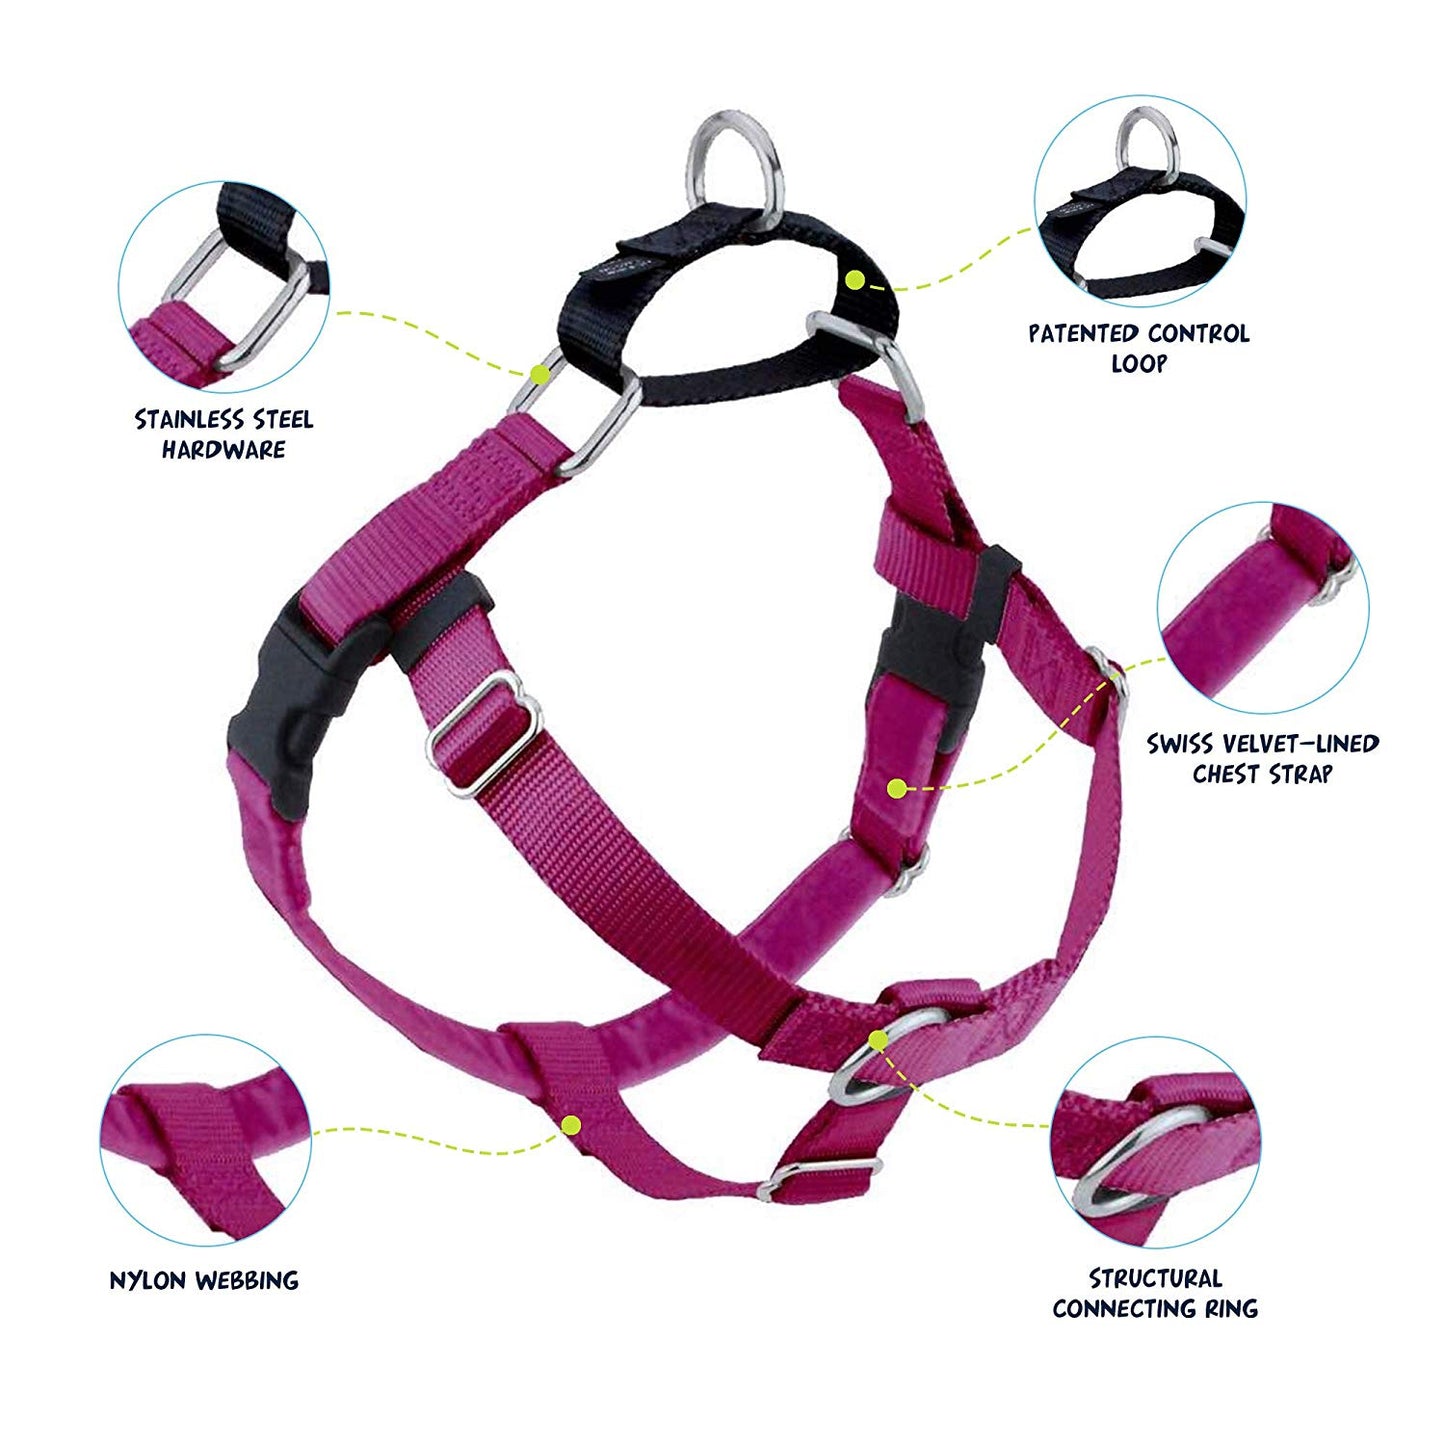 2 Hounds Design Freedom No-Pull Dog Harness - Adjustable Pet Harness dogs - Made in USA (1" X-Large, Raspberry)